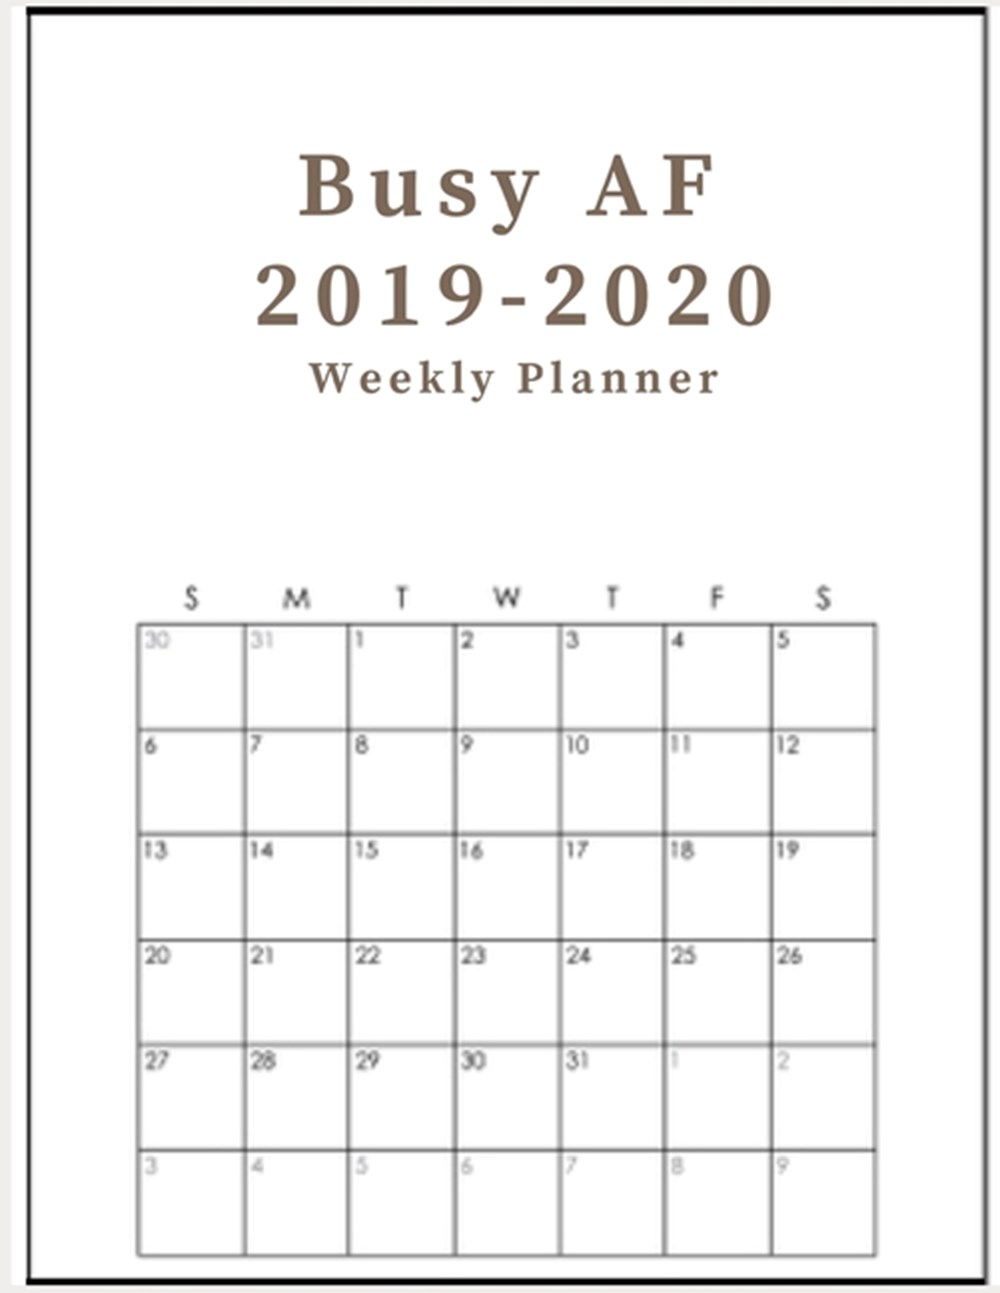 Busy AF 2019-2020 weekly planner Organizer & Diary for your 2020 activities